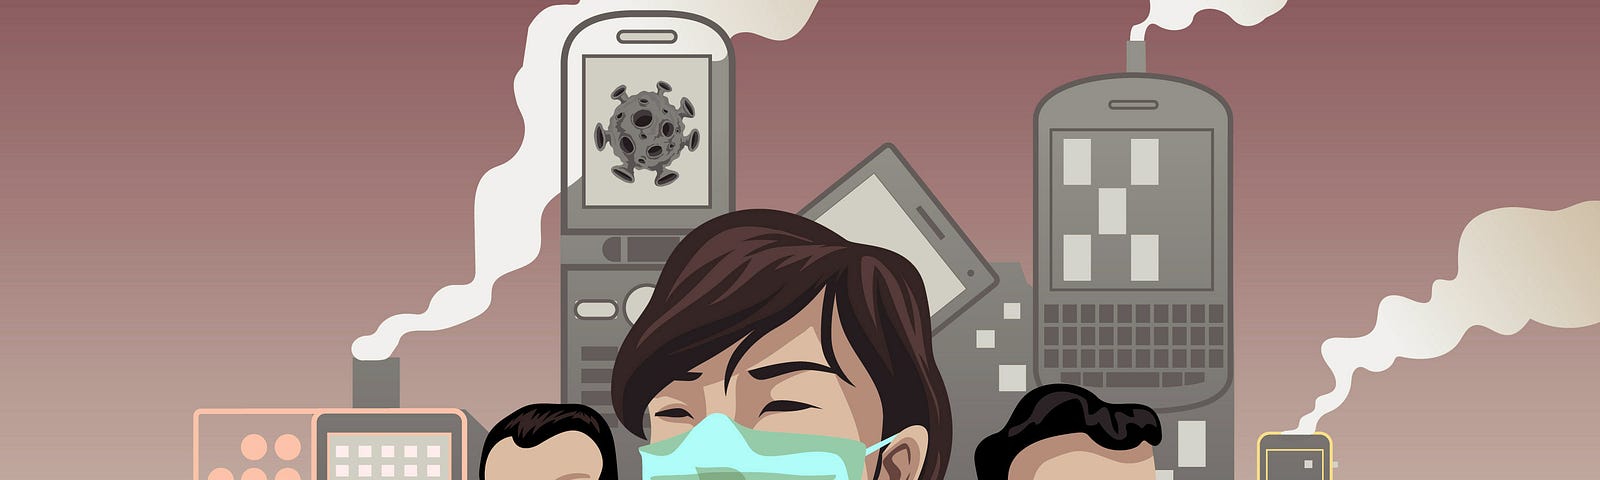 An illustration of people wearing masks to protect themselves from Corona virus